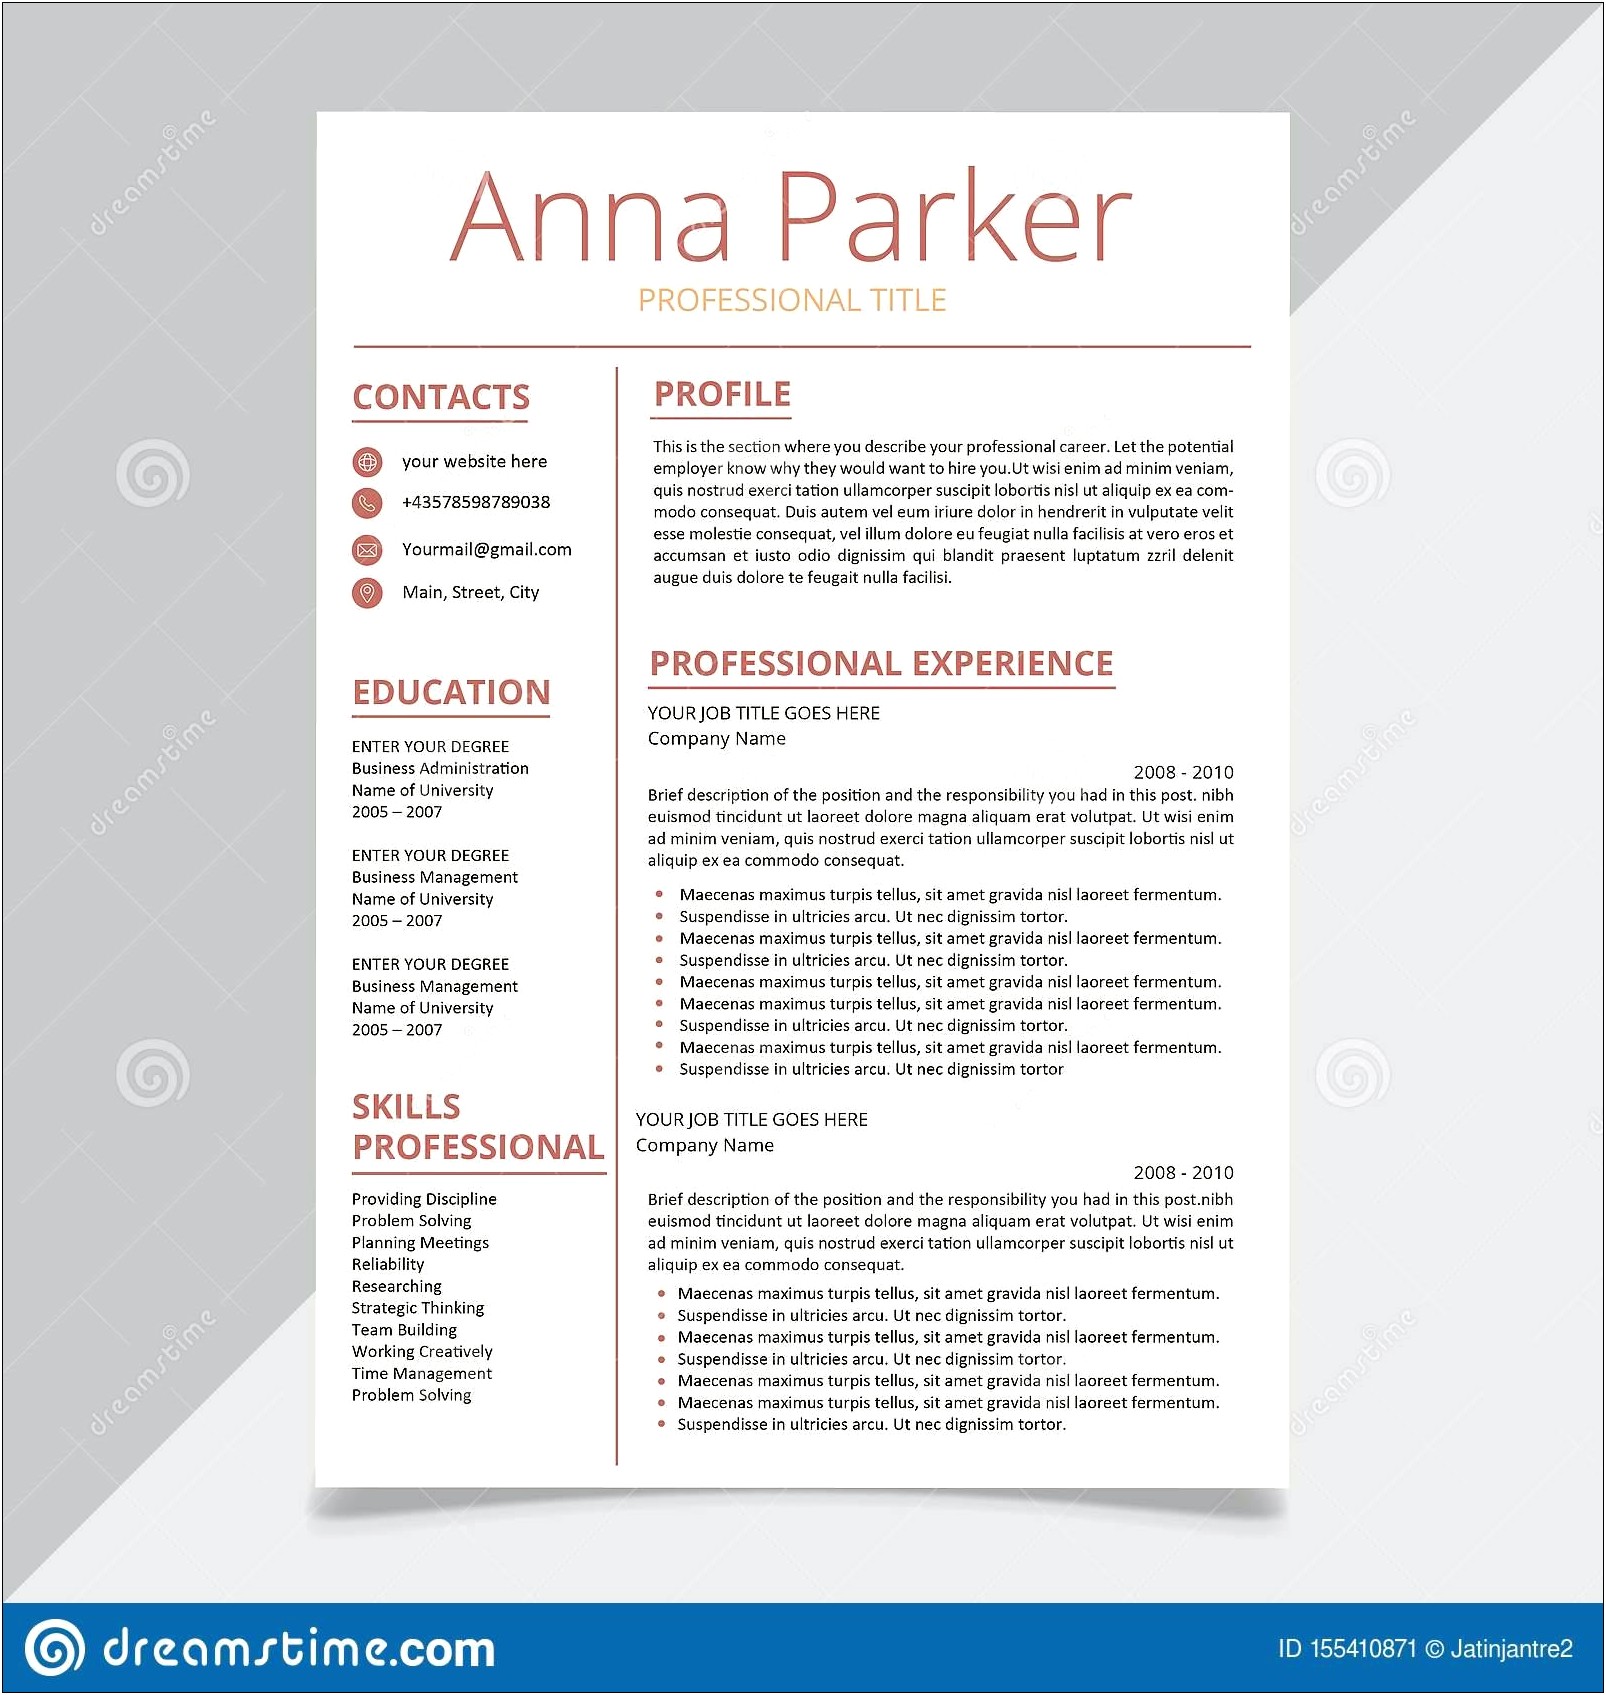 Free Minimalist Resume Template For Management